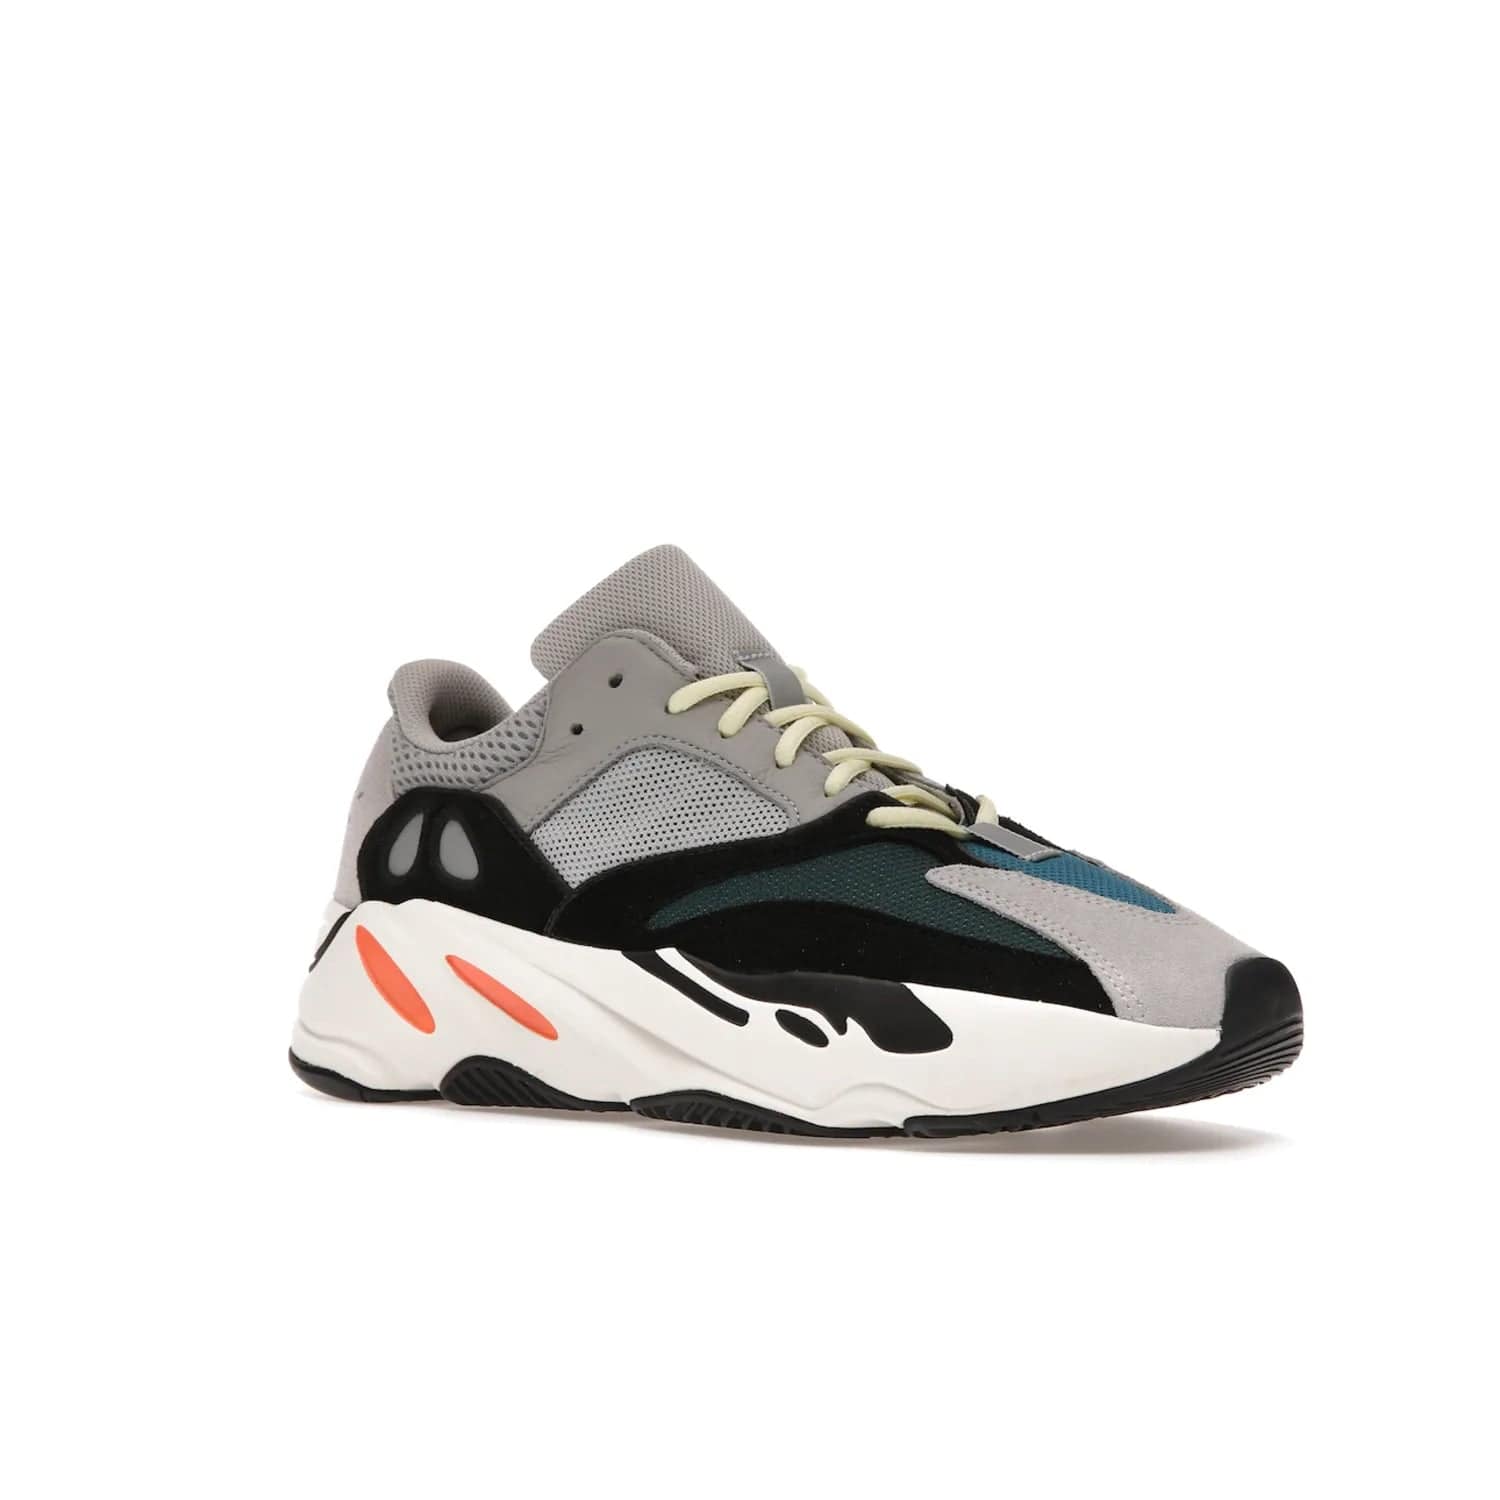 adidas Yeezy Boost 700 Wave Runner - Image 5 - Only at www.BallersClubKickz.com - Shop the iconic adidas Yeezy Boost 700 Wave Runner. Featuring grey mesh and leather upper, black suede overlays, teal mesh underlays, and signature Boost sole. Be bold & make a statement.